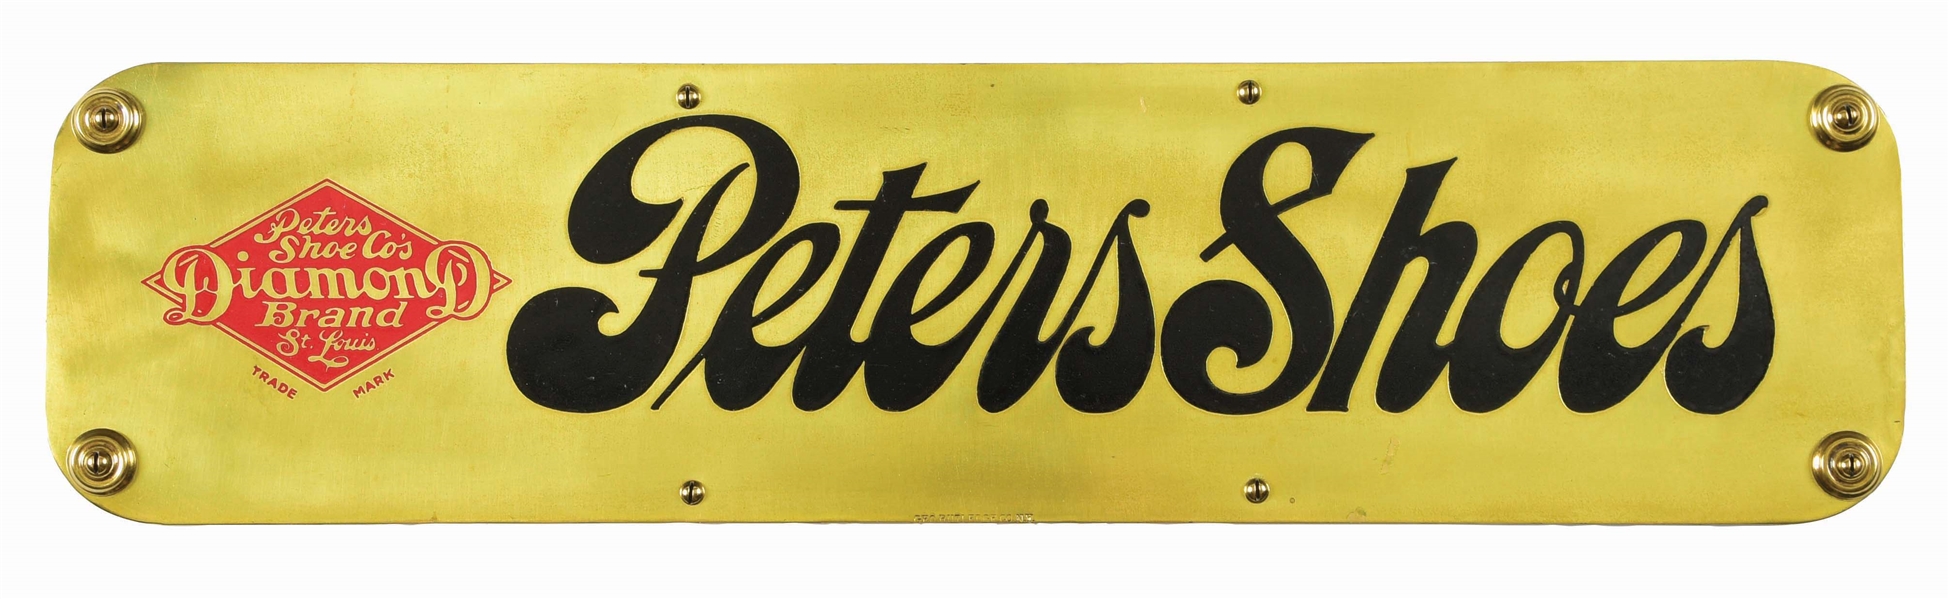 ETCHED BRASS PETERS SHOES DIAMOND BRAND SIGN.